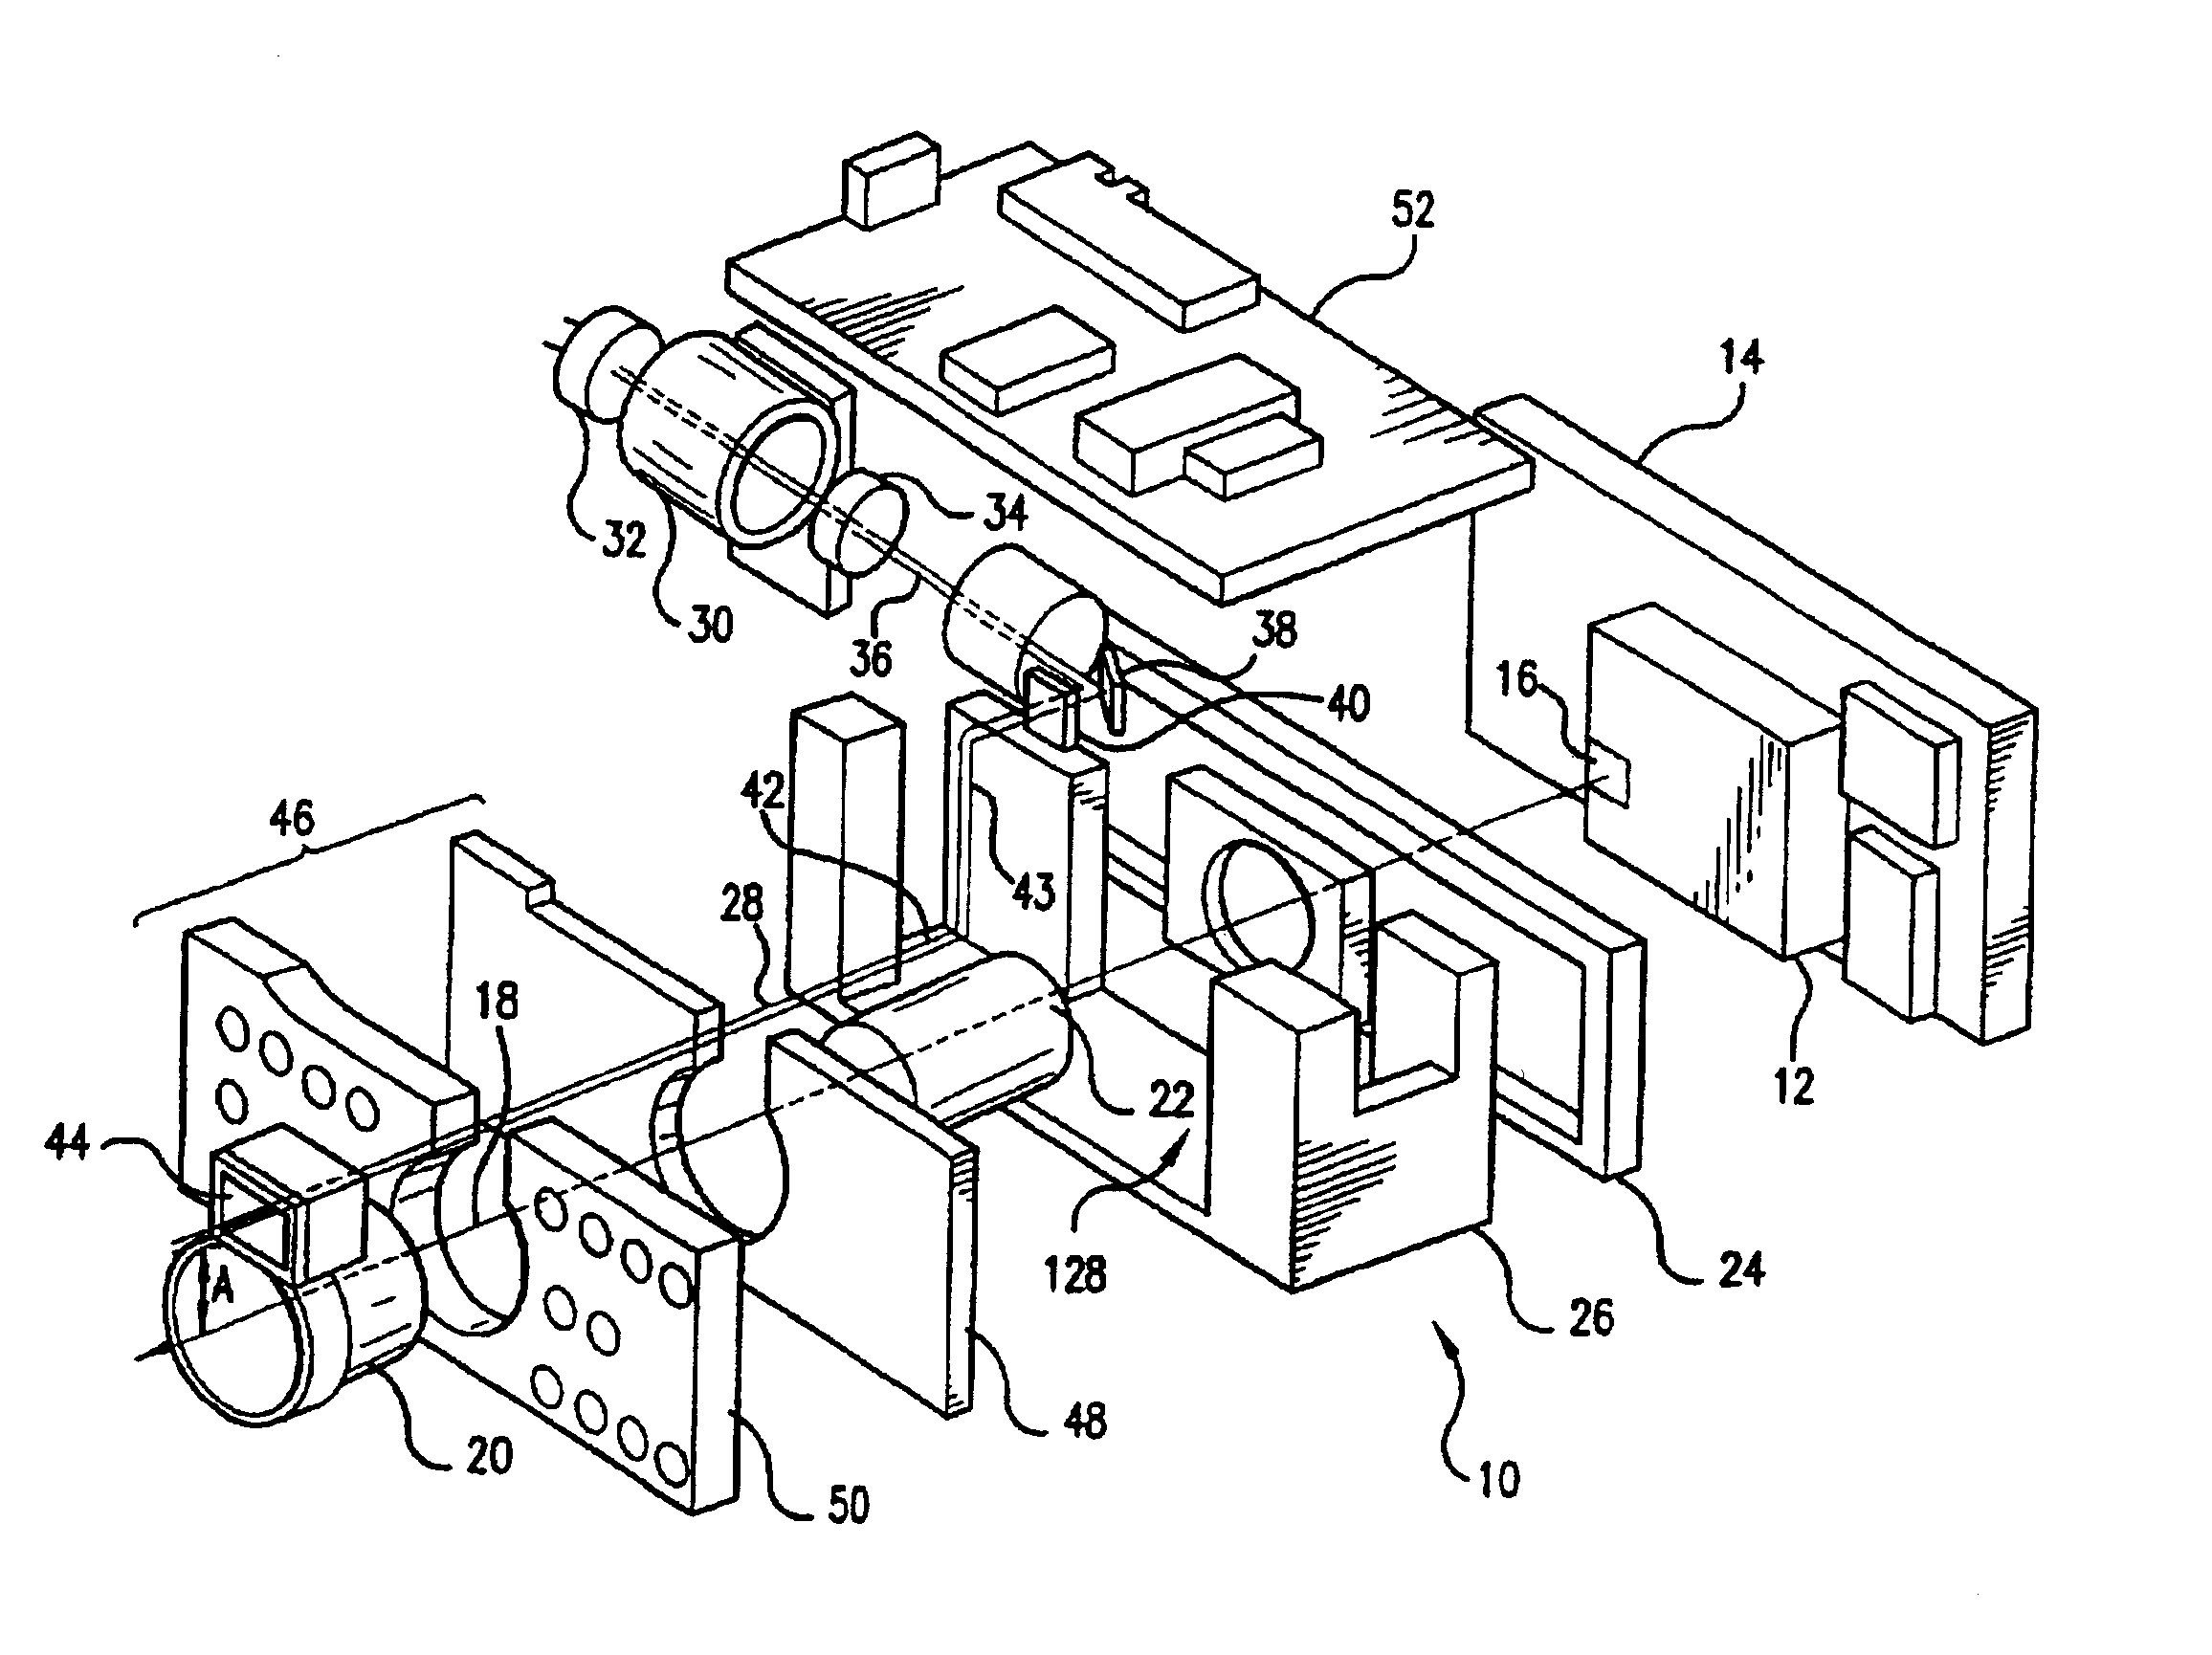 Image capture system and method